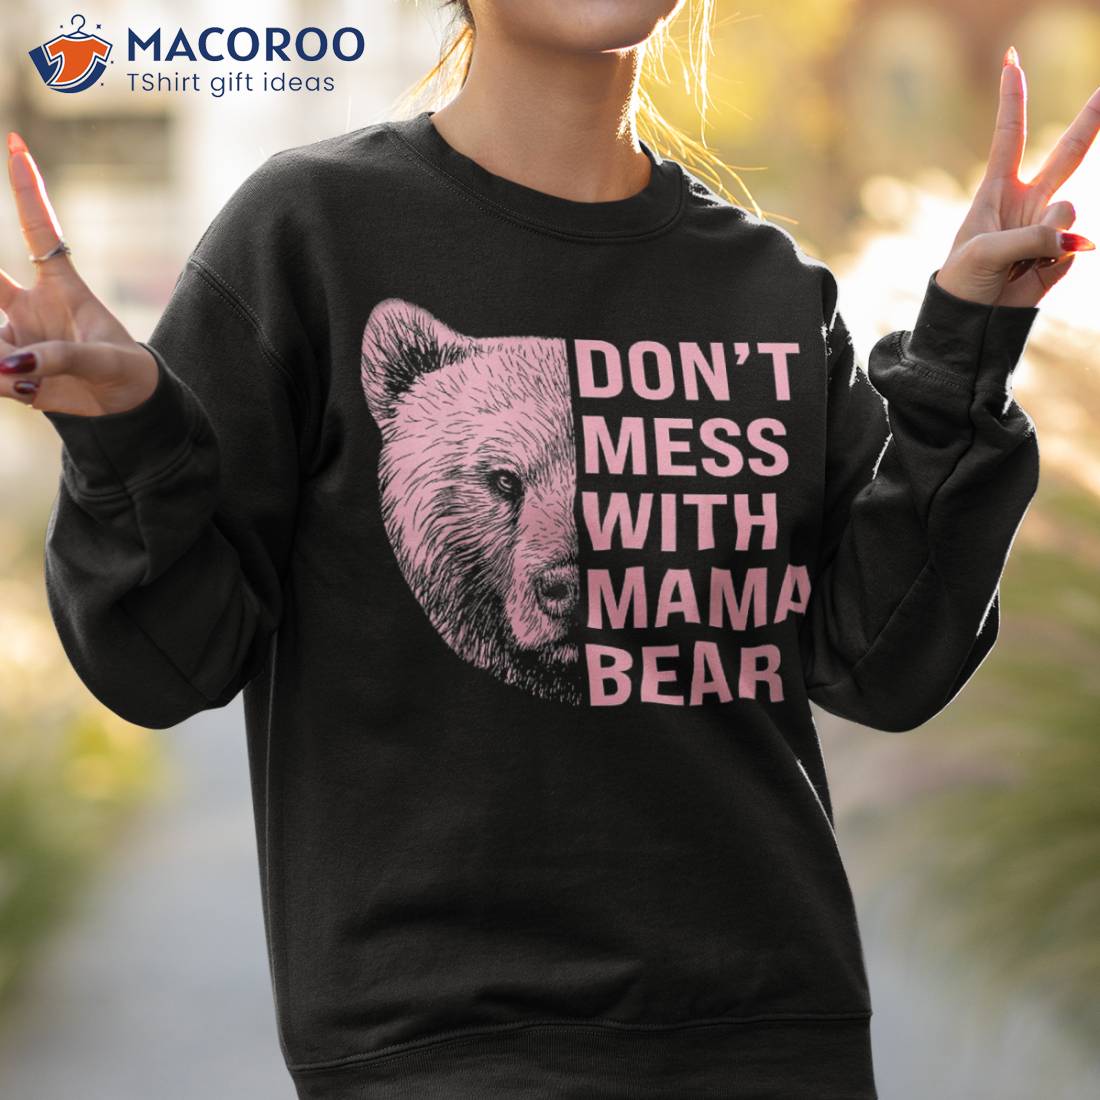 https://images.macoroo.com/wp-content/uploads/2023/05/vintage-mothers-day-don-t-mess-with-mama-bear-gifts-shirt-sweatshirt-2.jpg